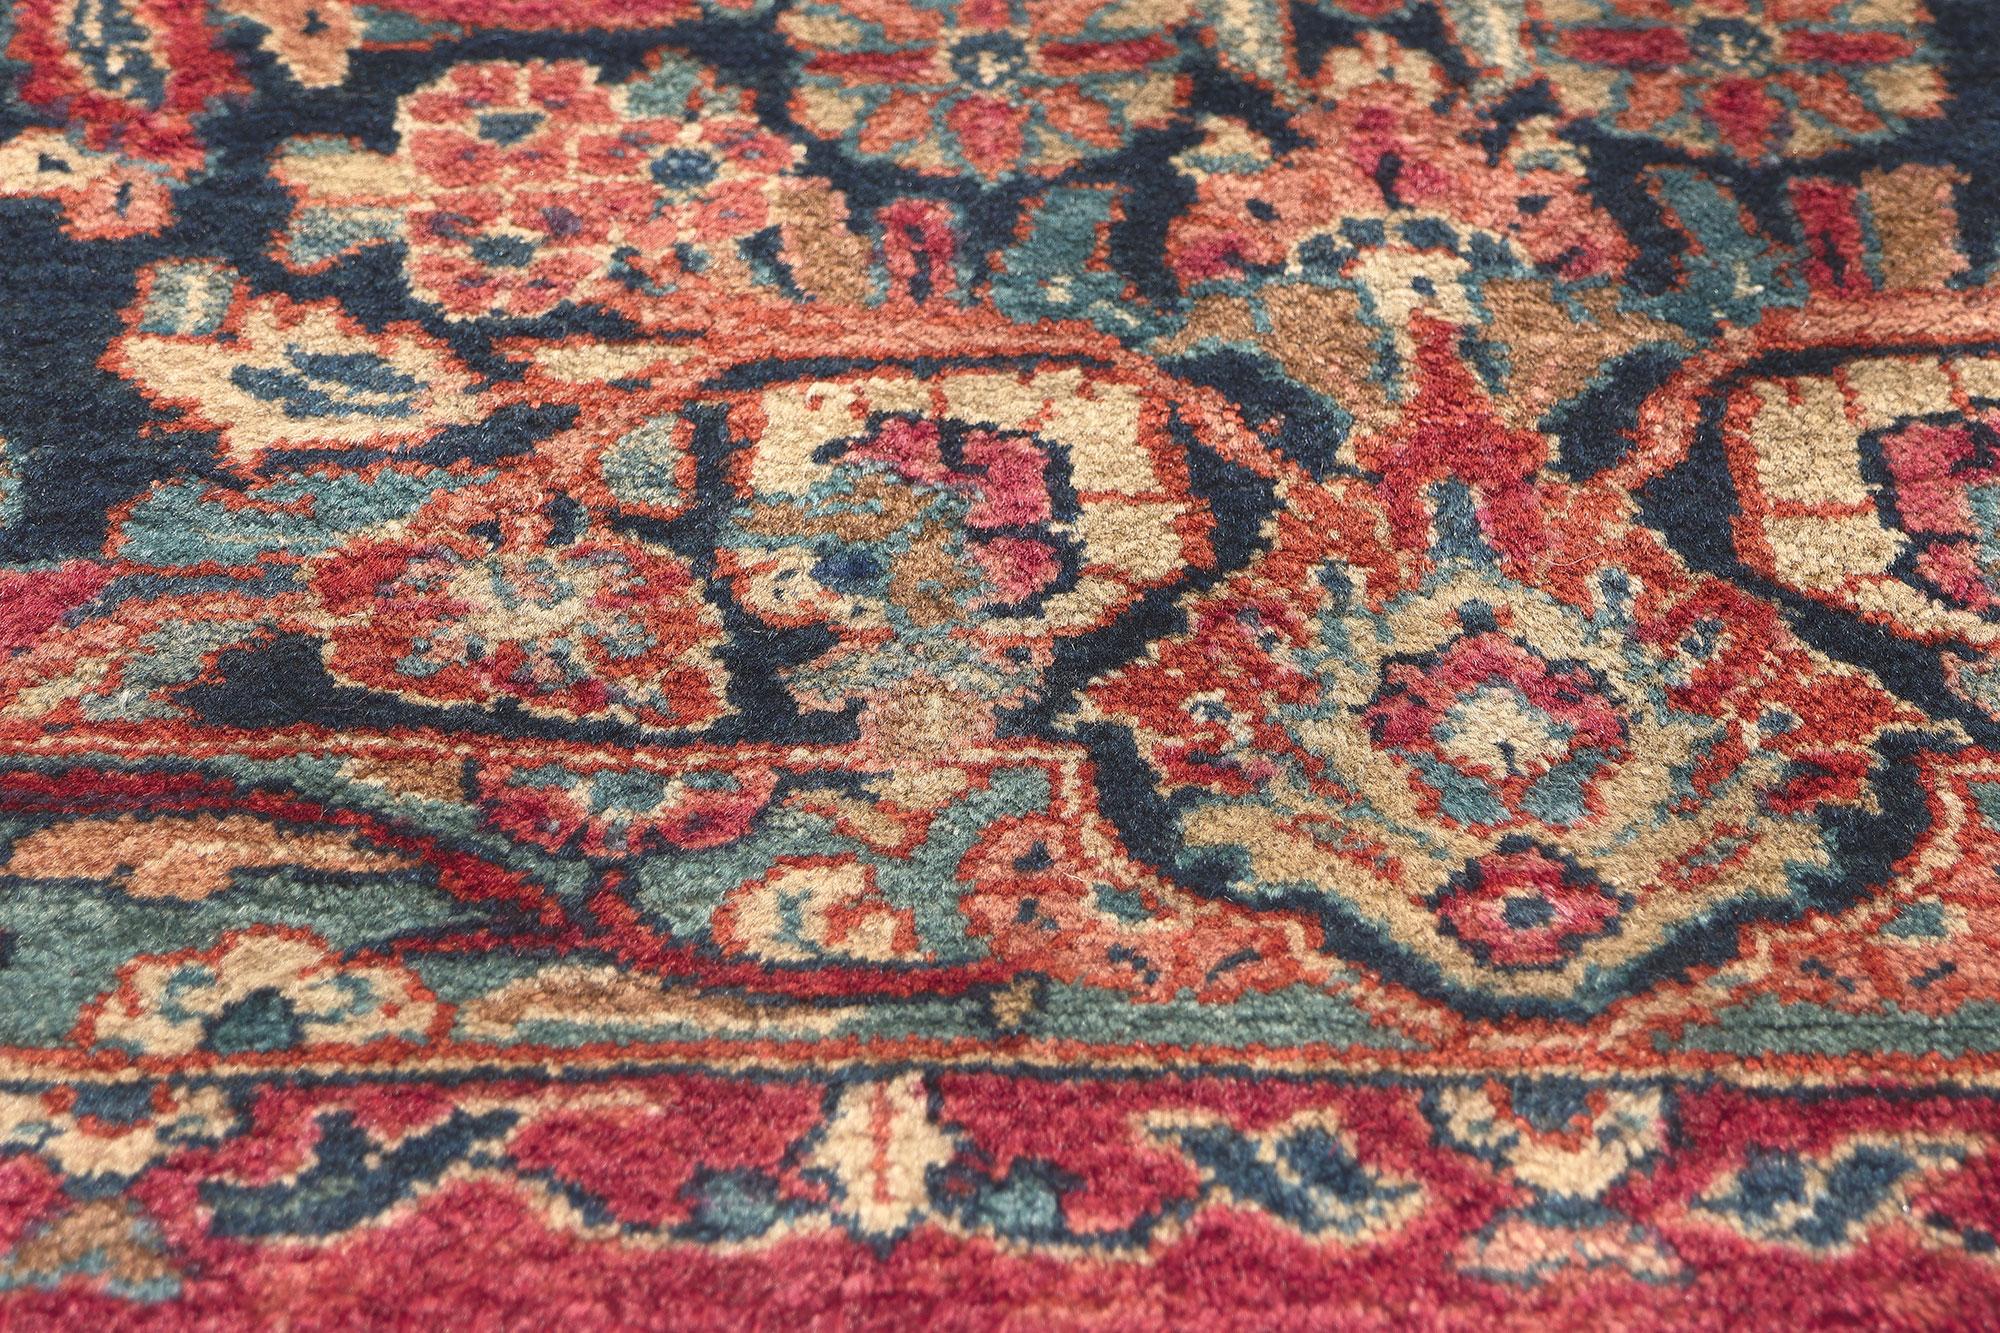 Antique Persian Sarouk Rug, Timeless Elegance Meets Art Nouveau In Good Condition For Sale In Dallas, TX